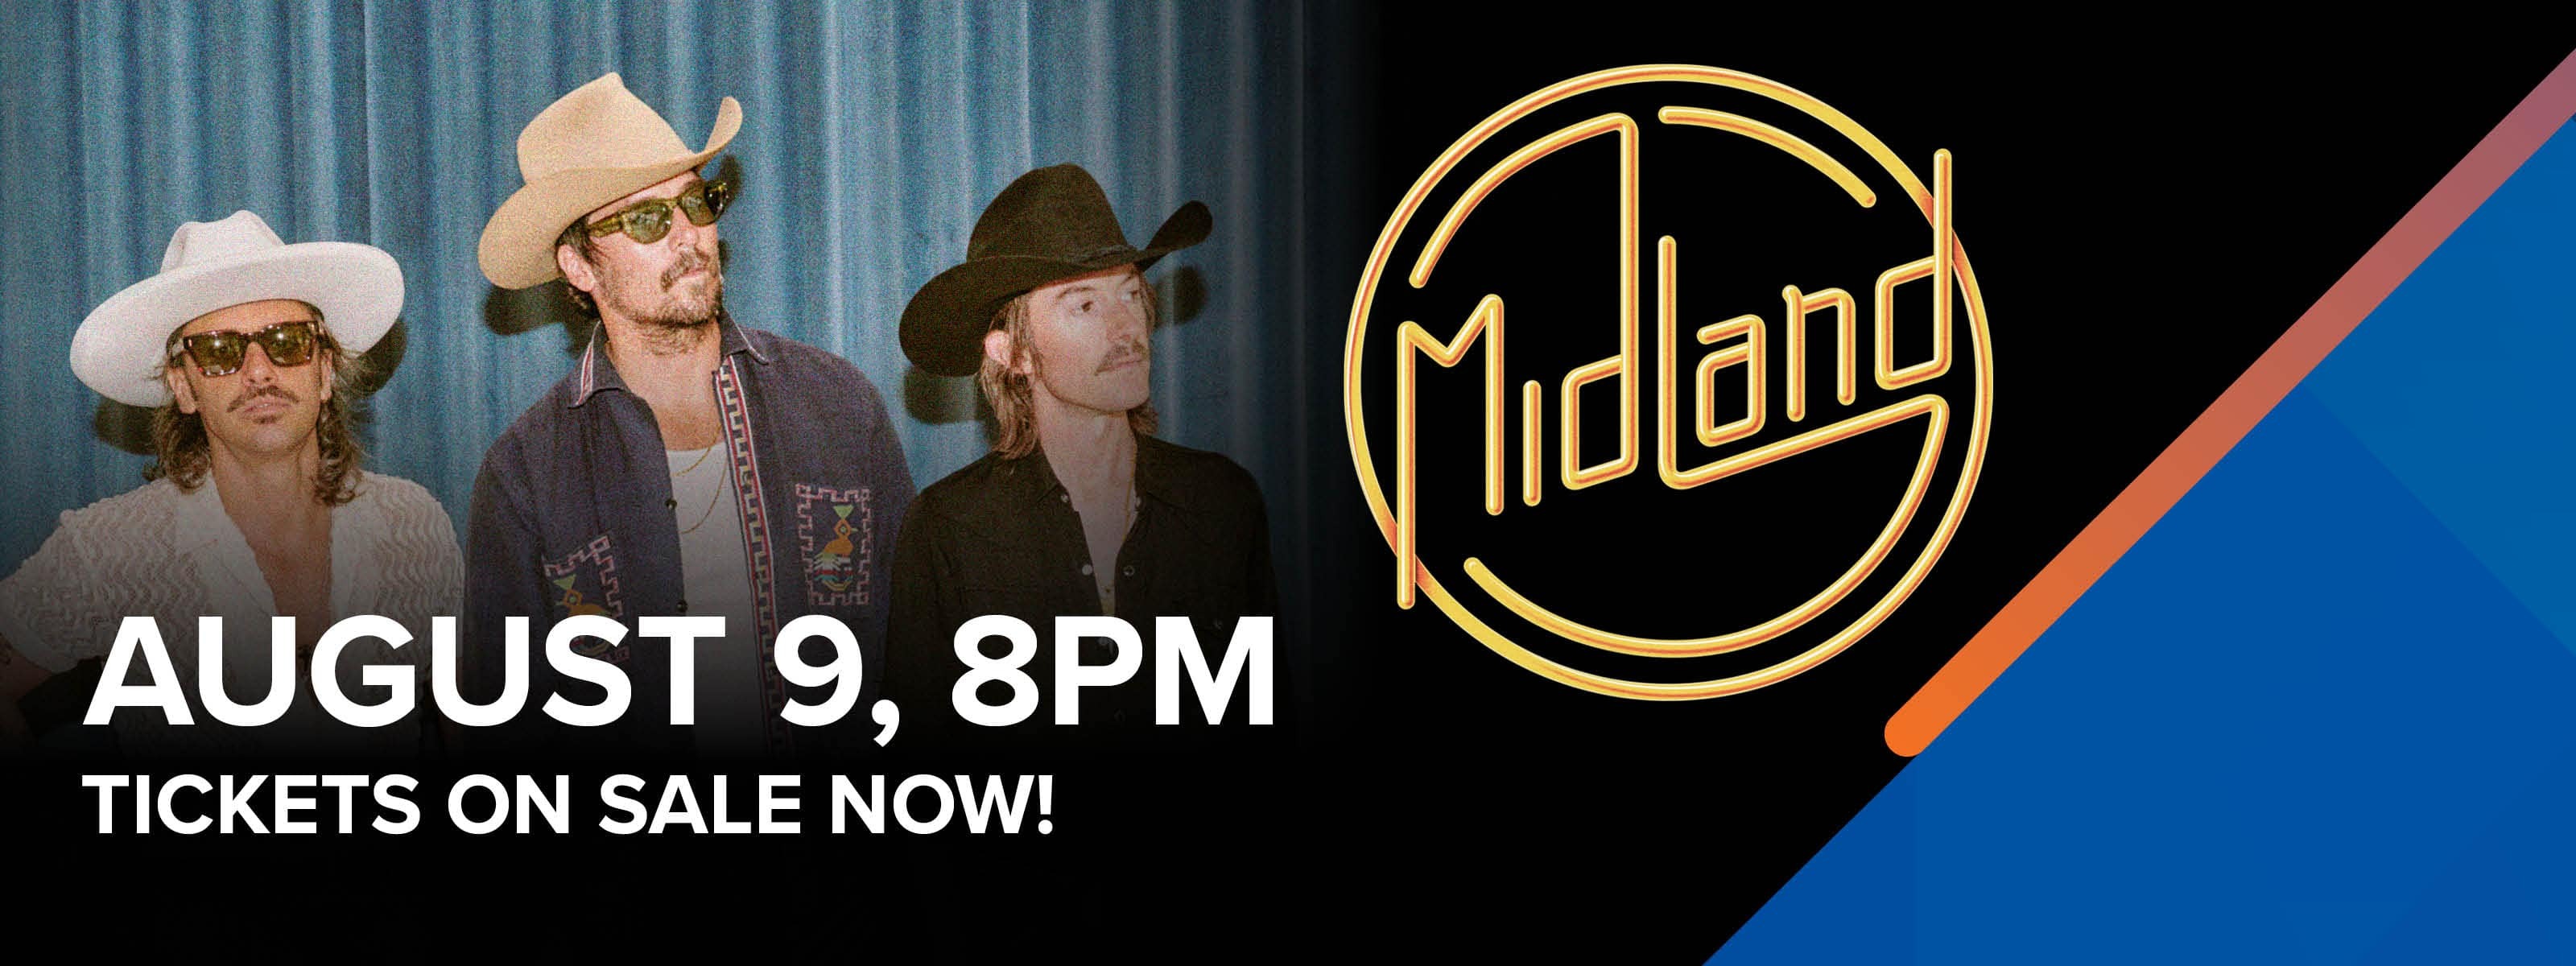 Midland August 9, 8pm - Tickets On Sale Now